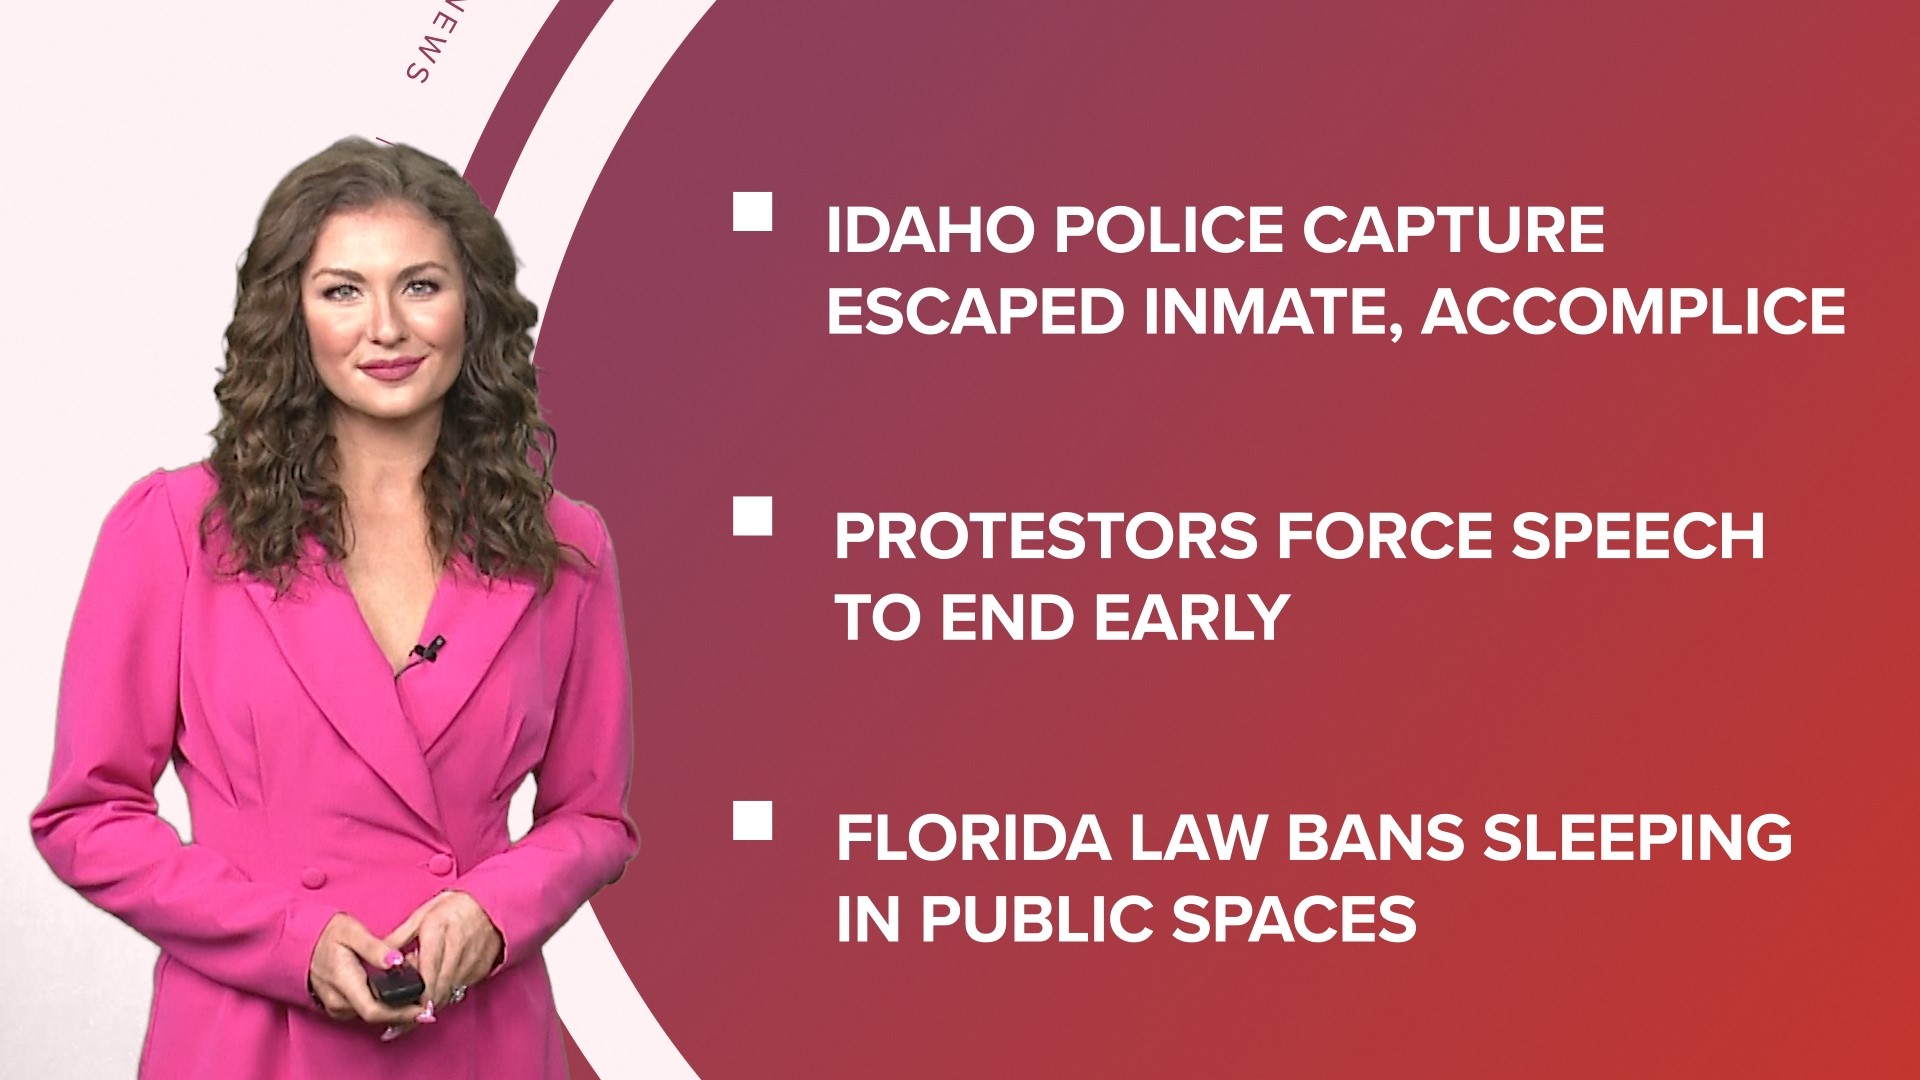 A look at what is happening in the news from Idaho police capturing an escaped inmate to the DOJ and several states suing Apple and more.